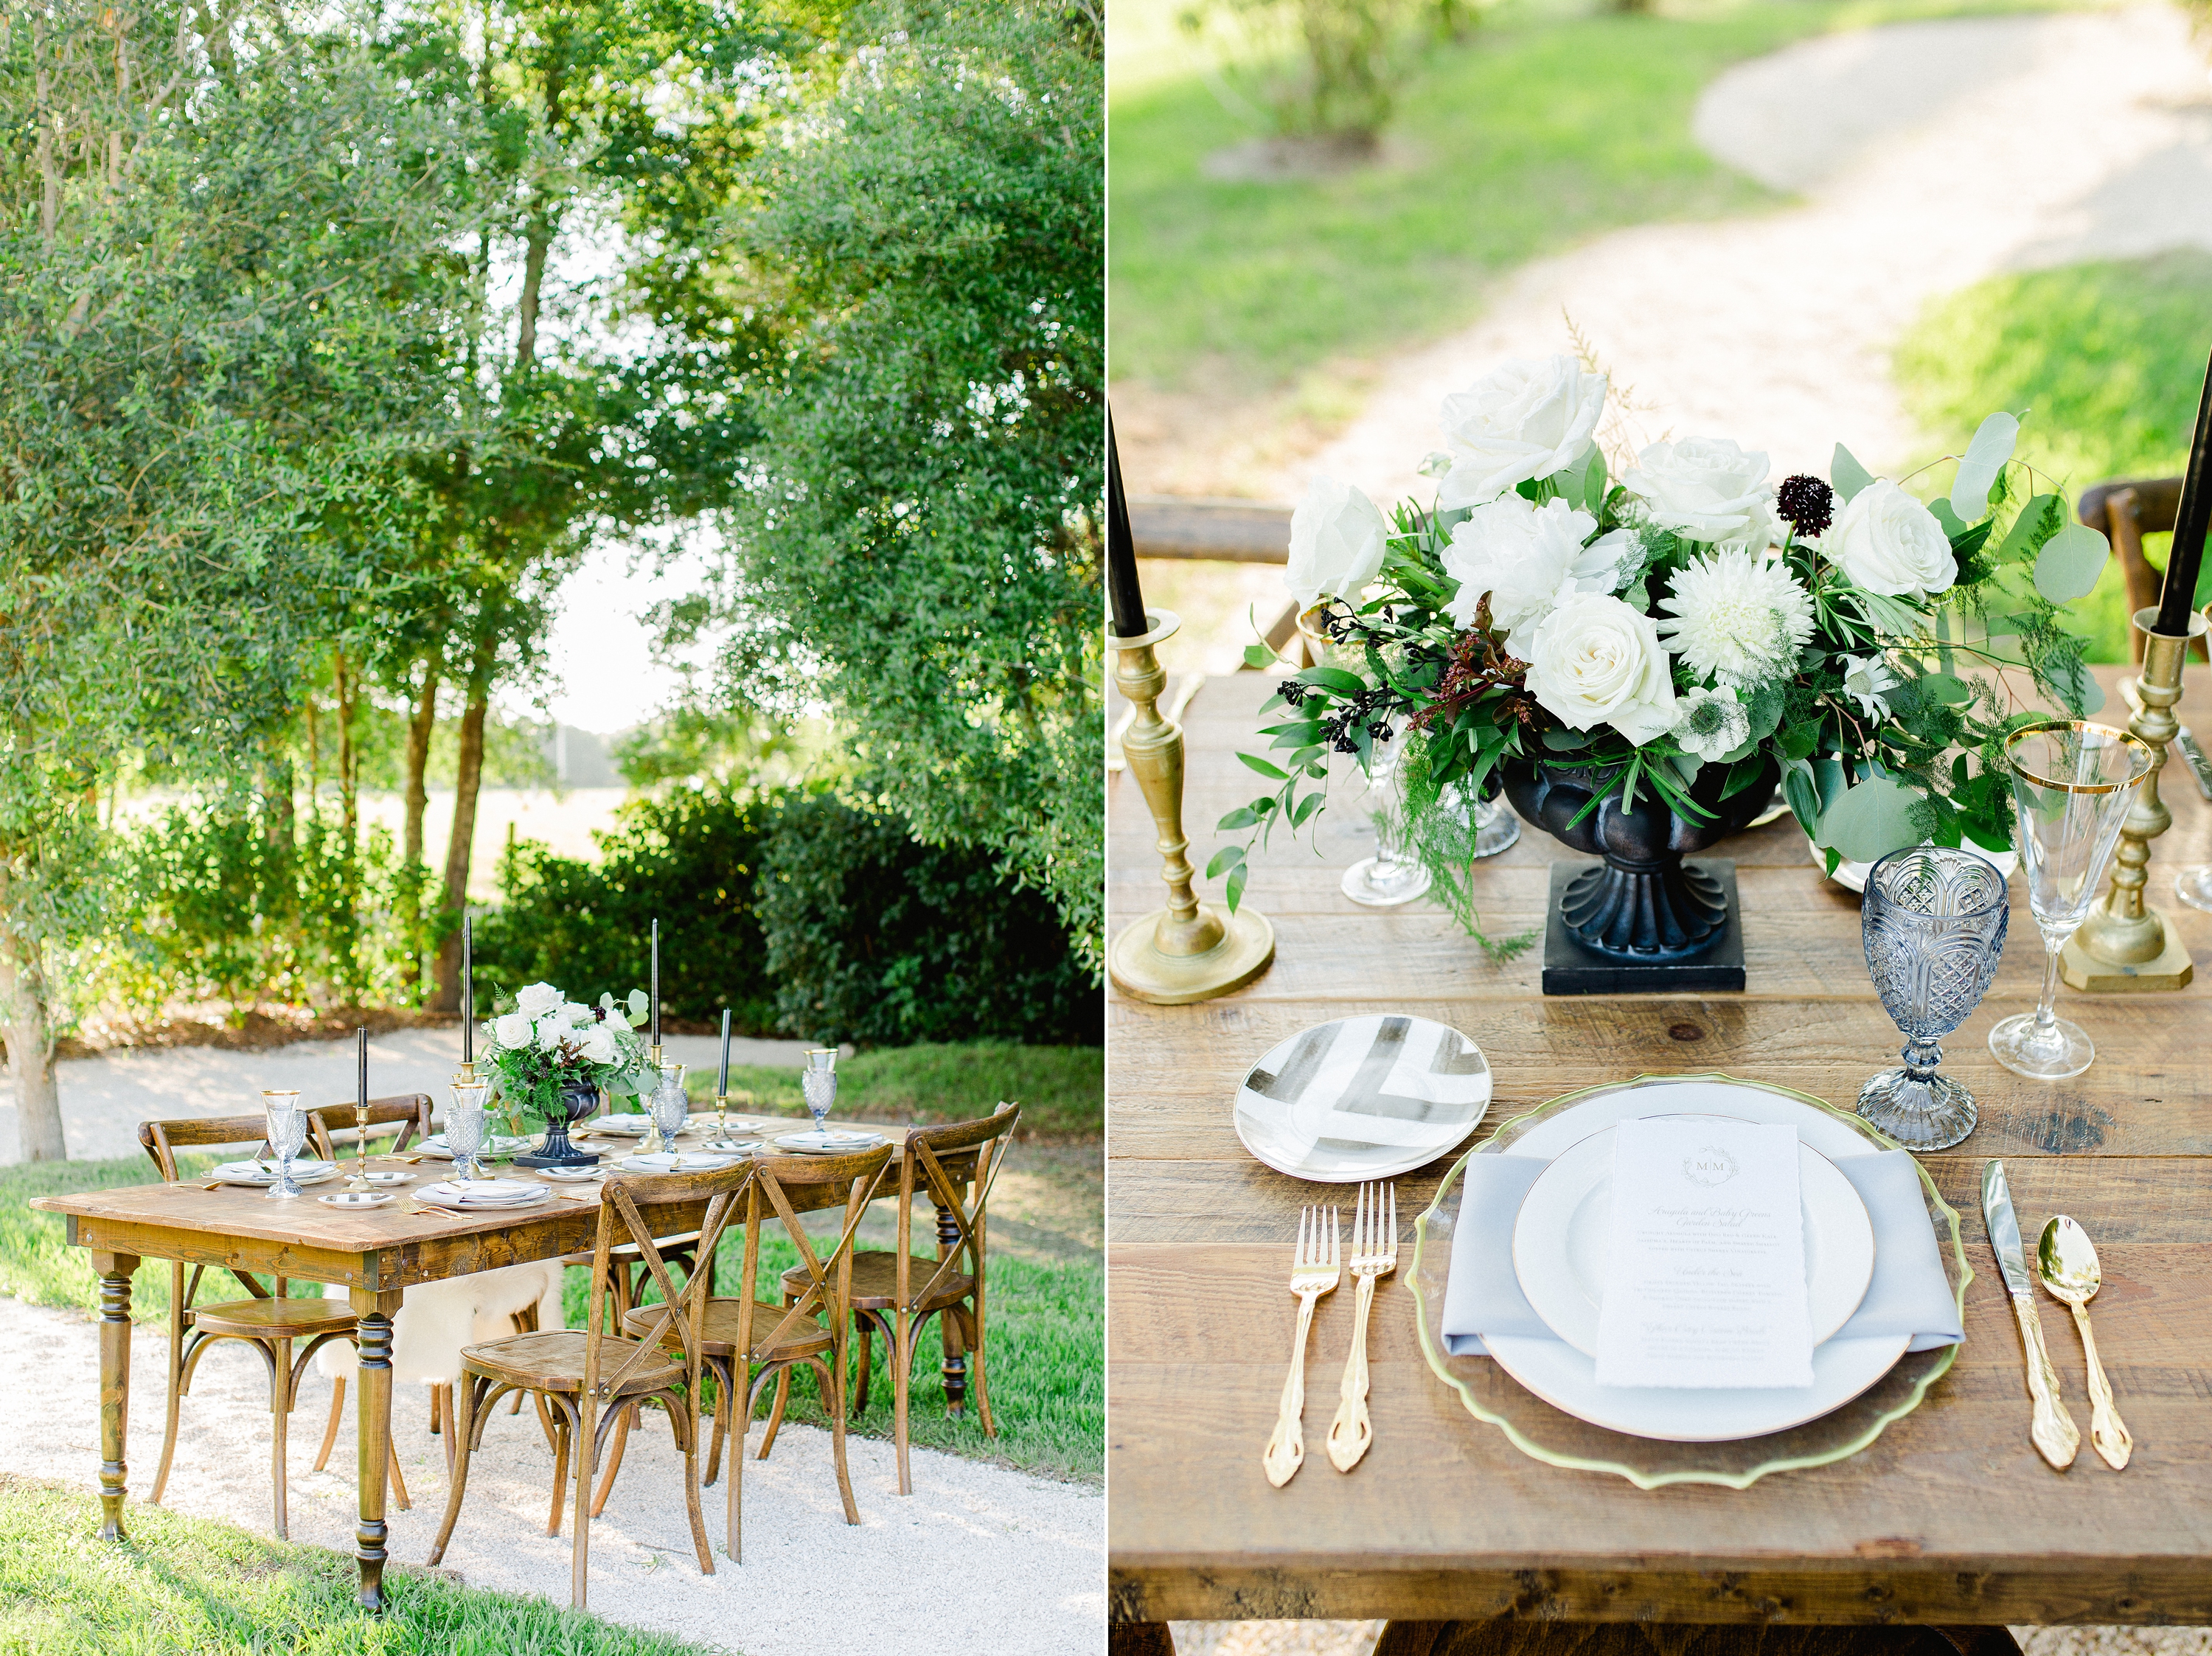 Paradise Springs Styled Shoot | © Ailyn La Torre Photography 2019